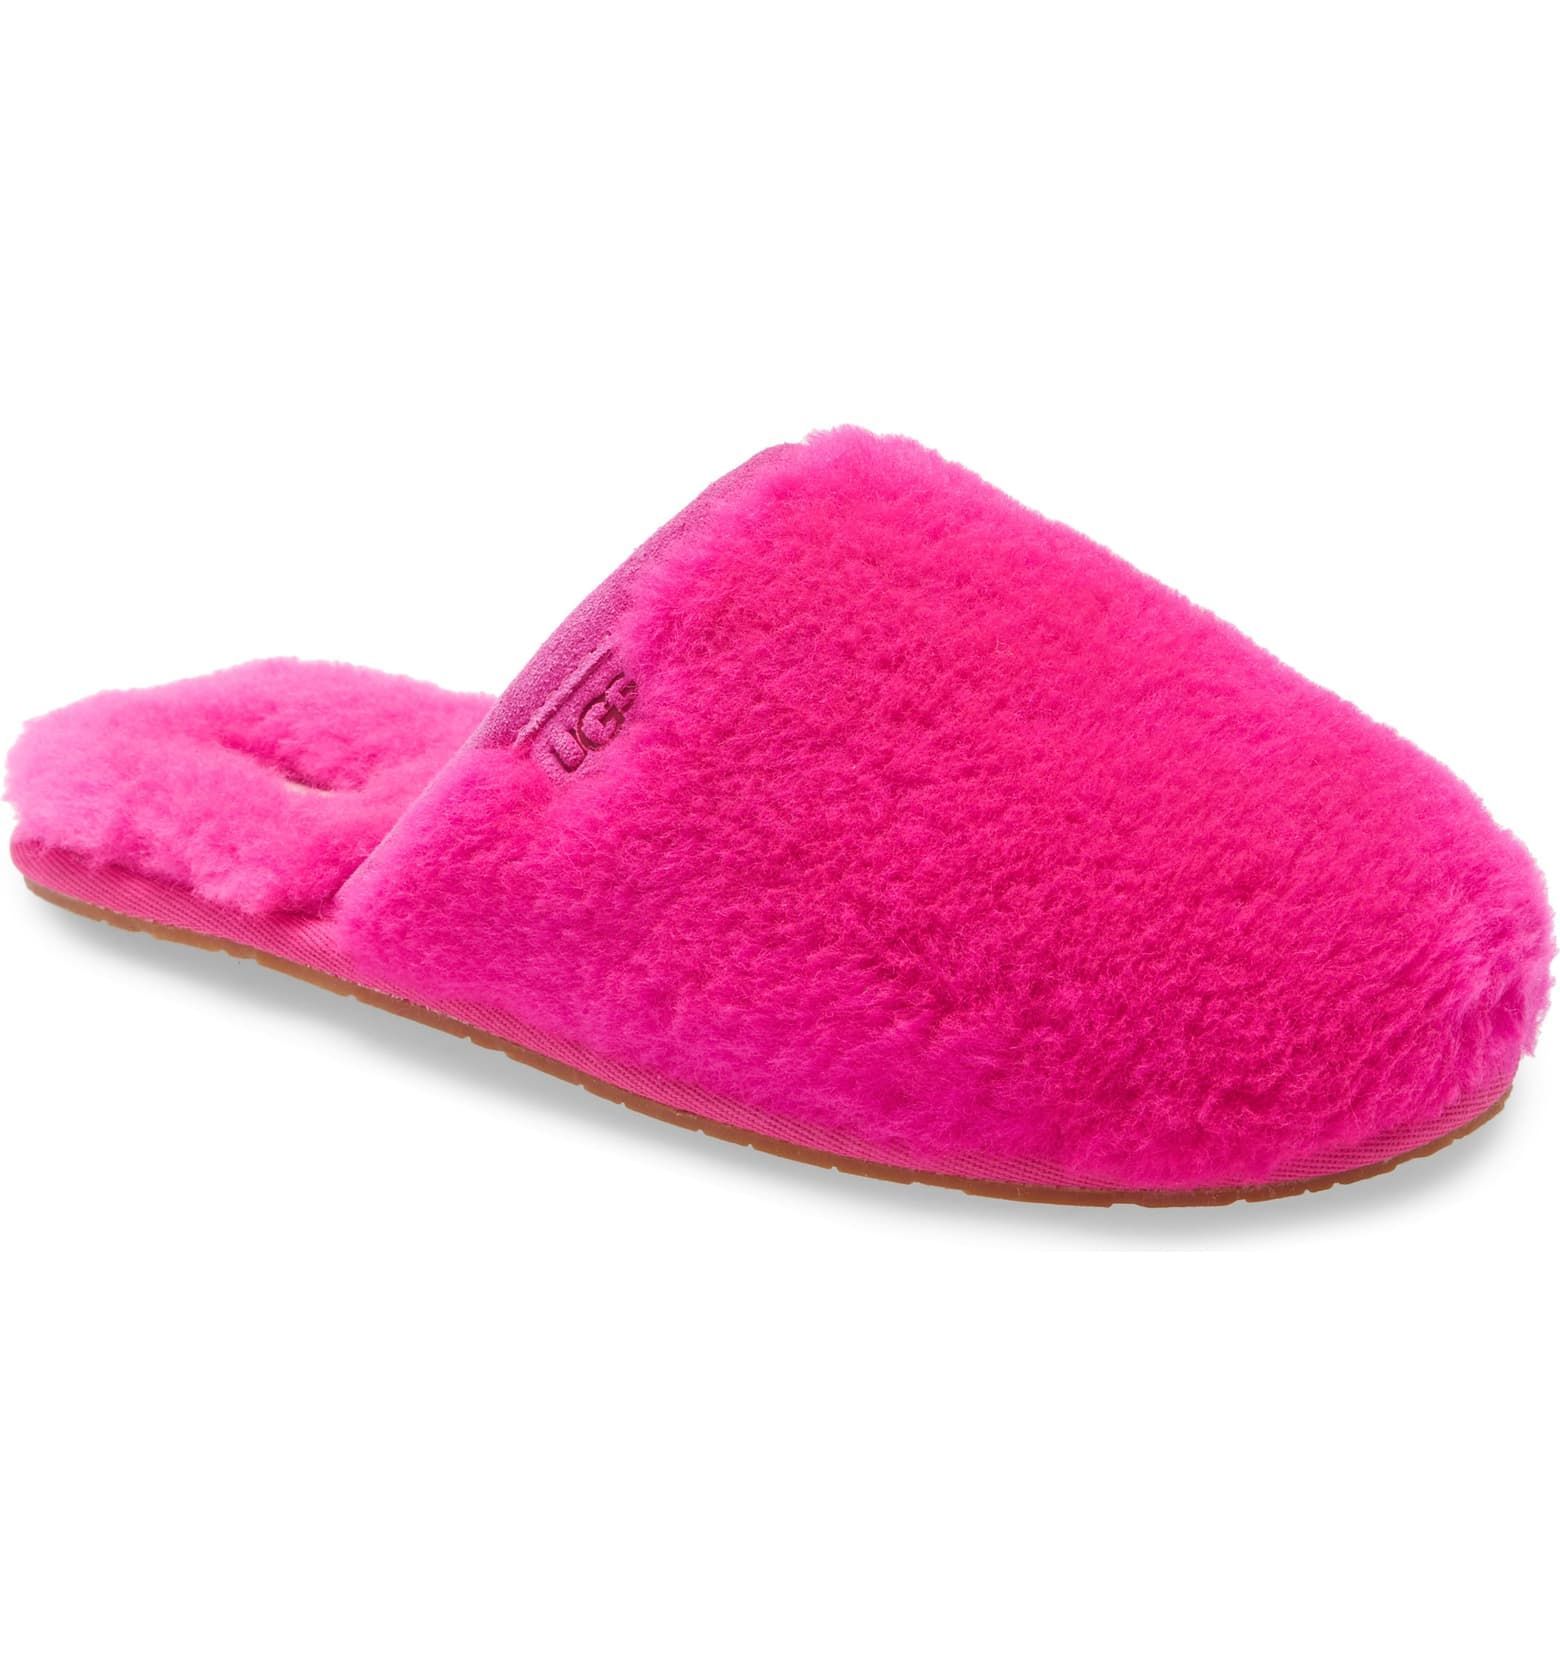 ugg pink slippers sale